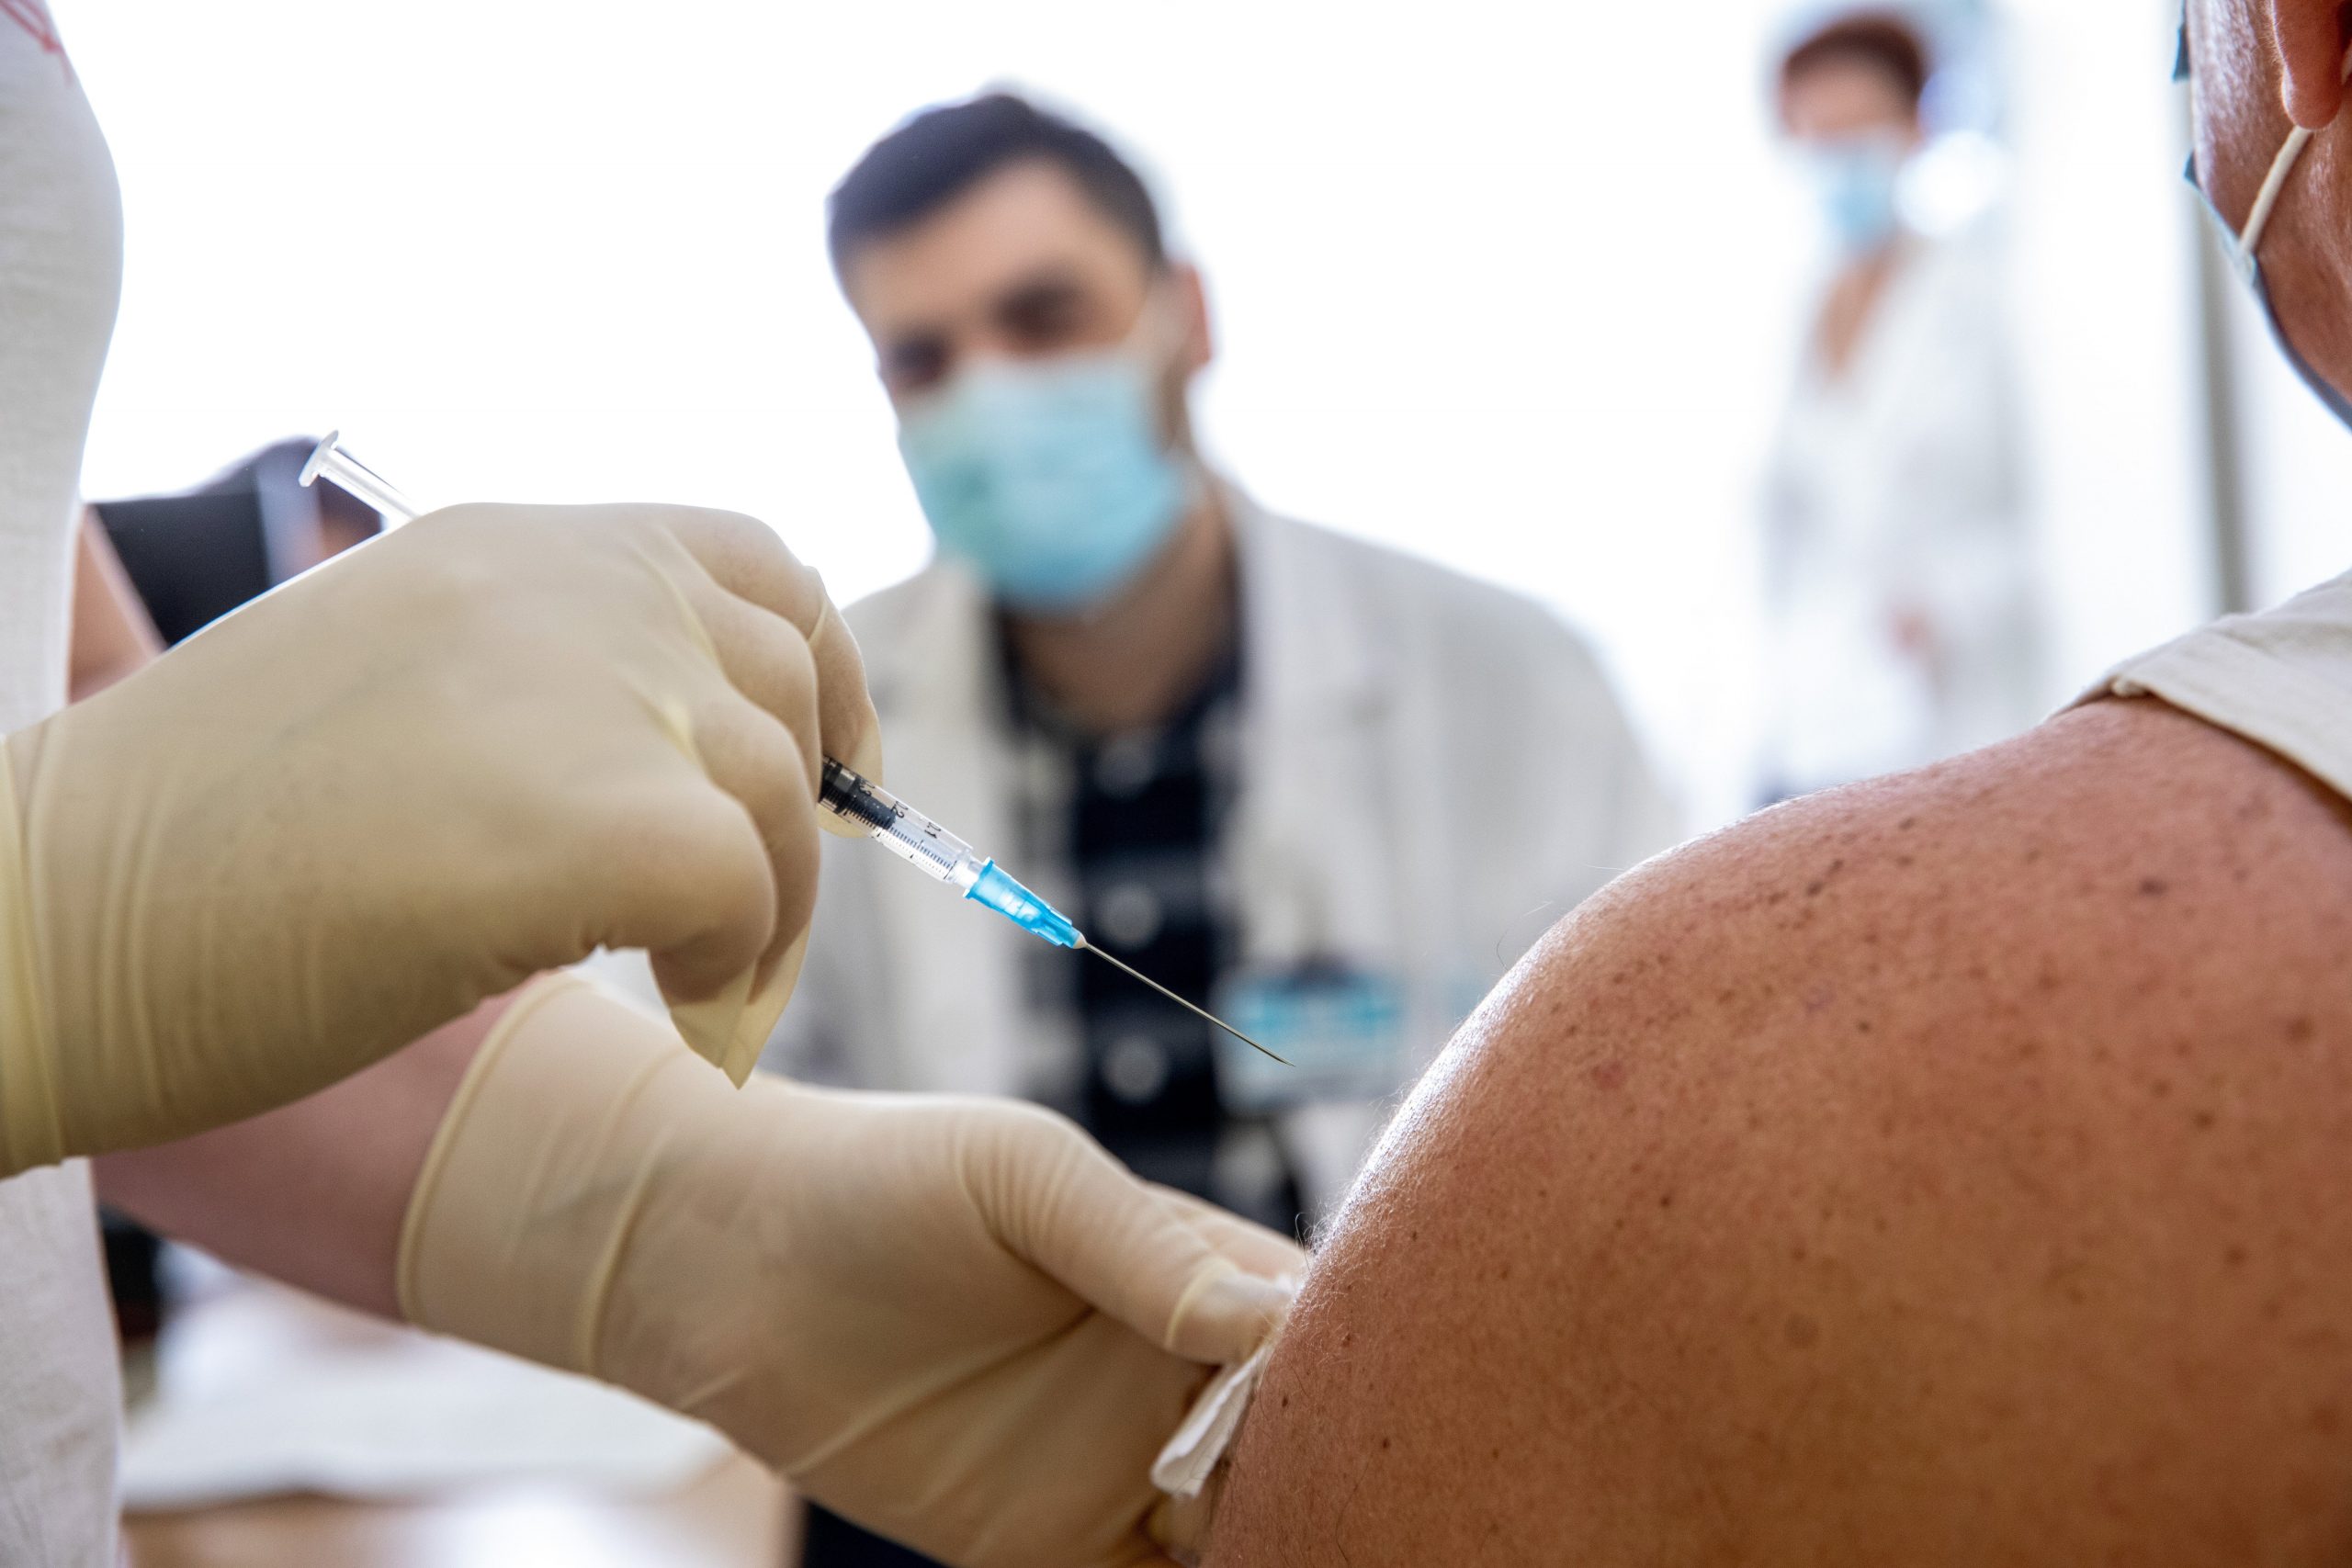 Mixed Reactions to Employers' Right to Make Vaccination Compulsory